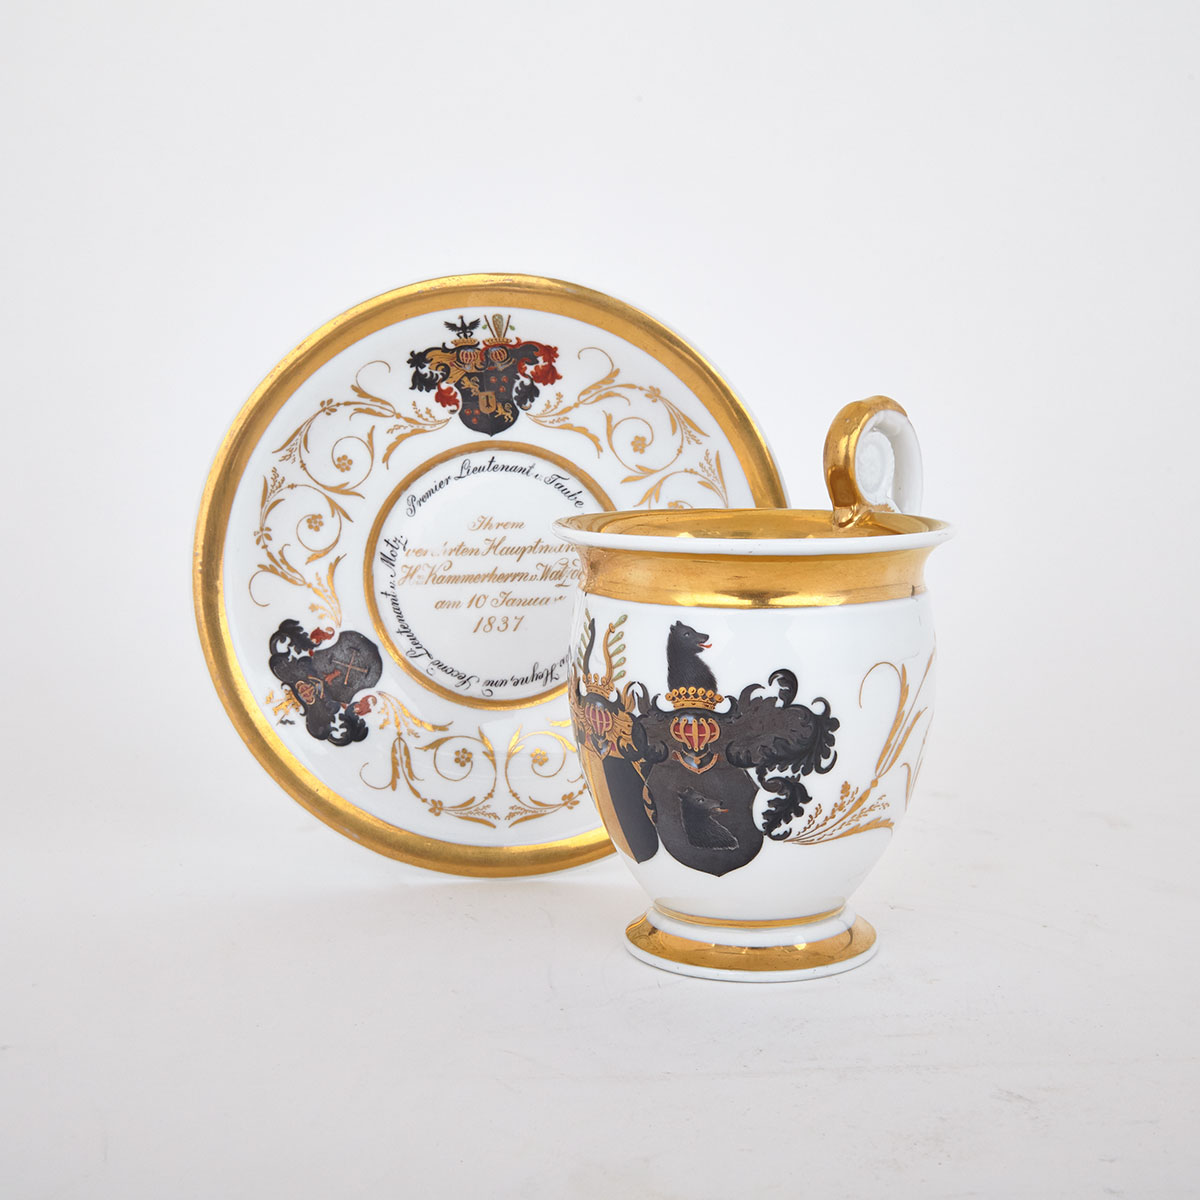 Berlin Armorial Cup and Saucer, 1837